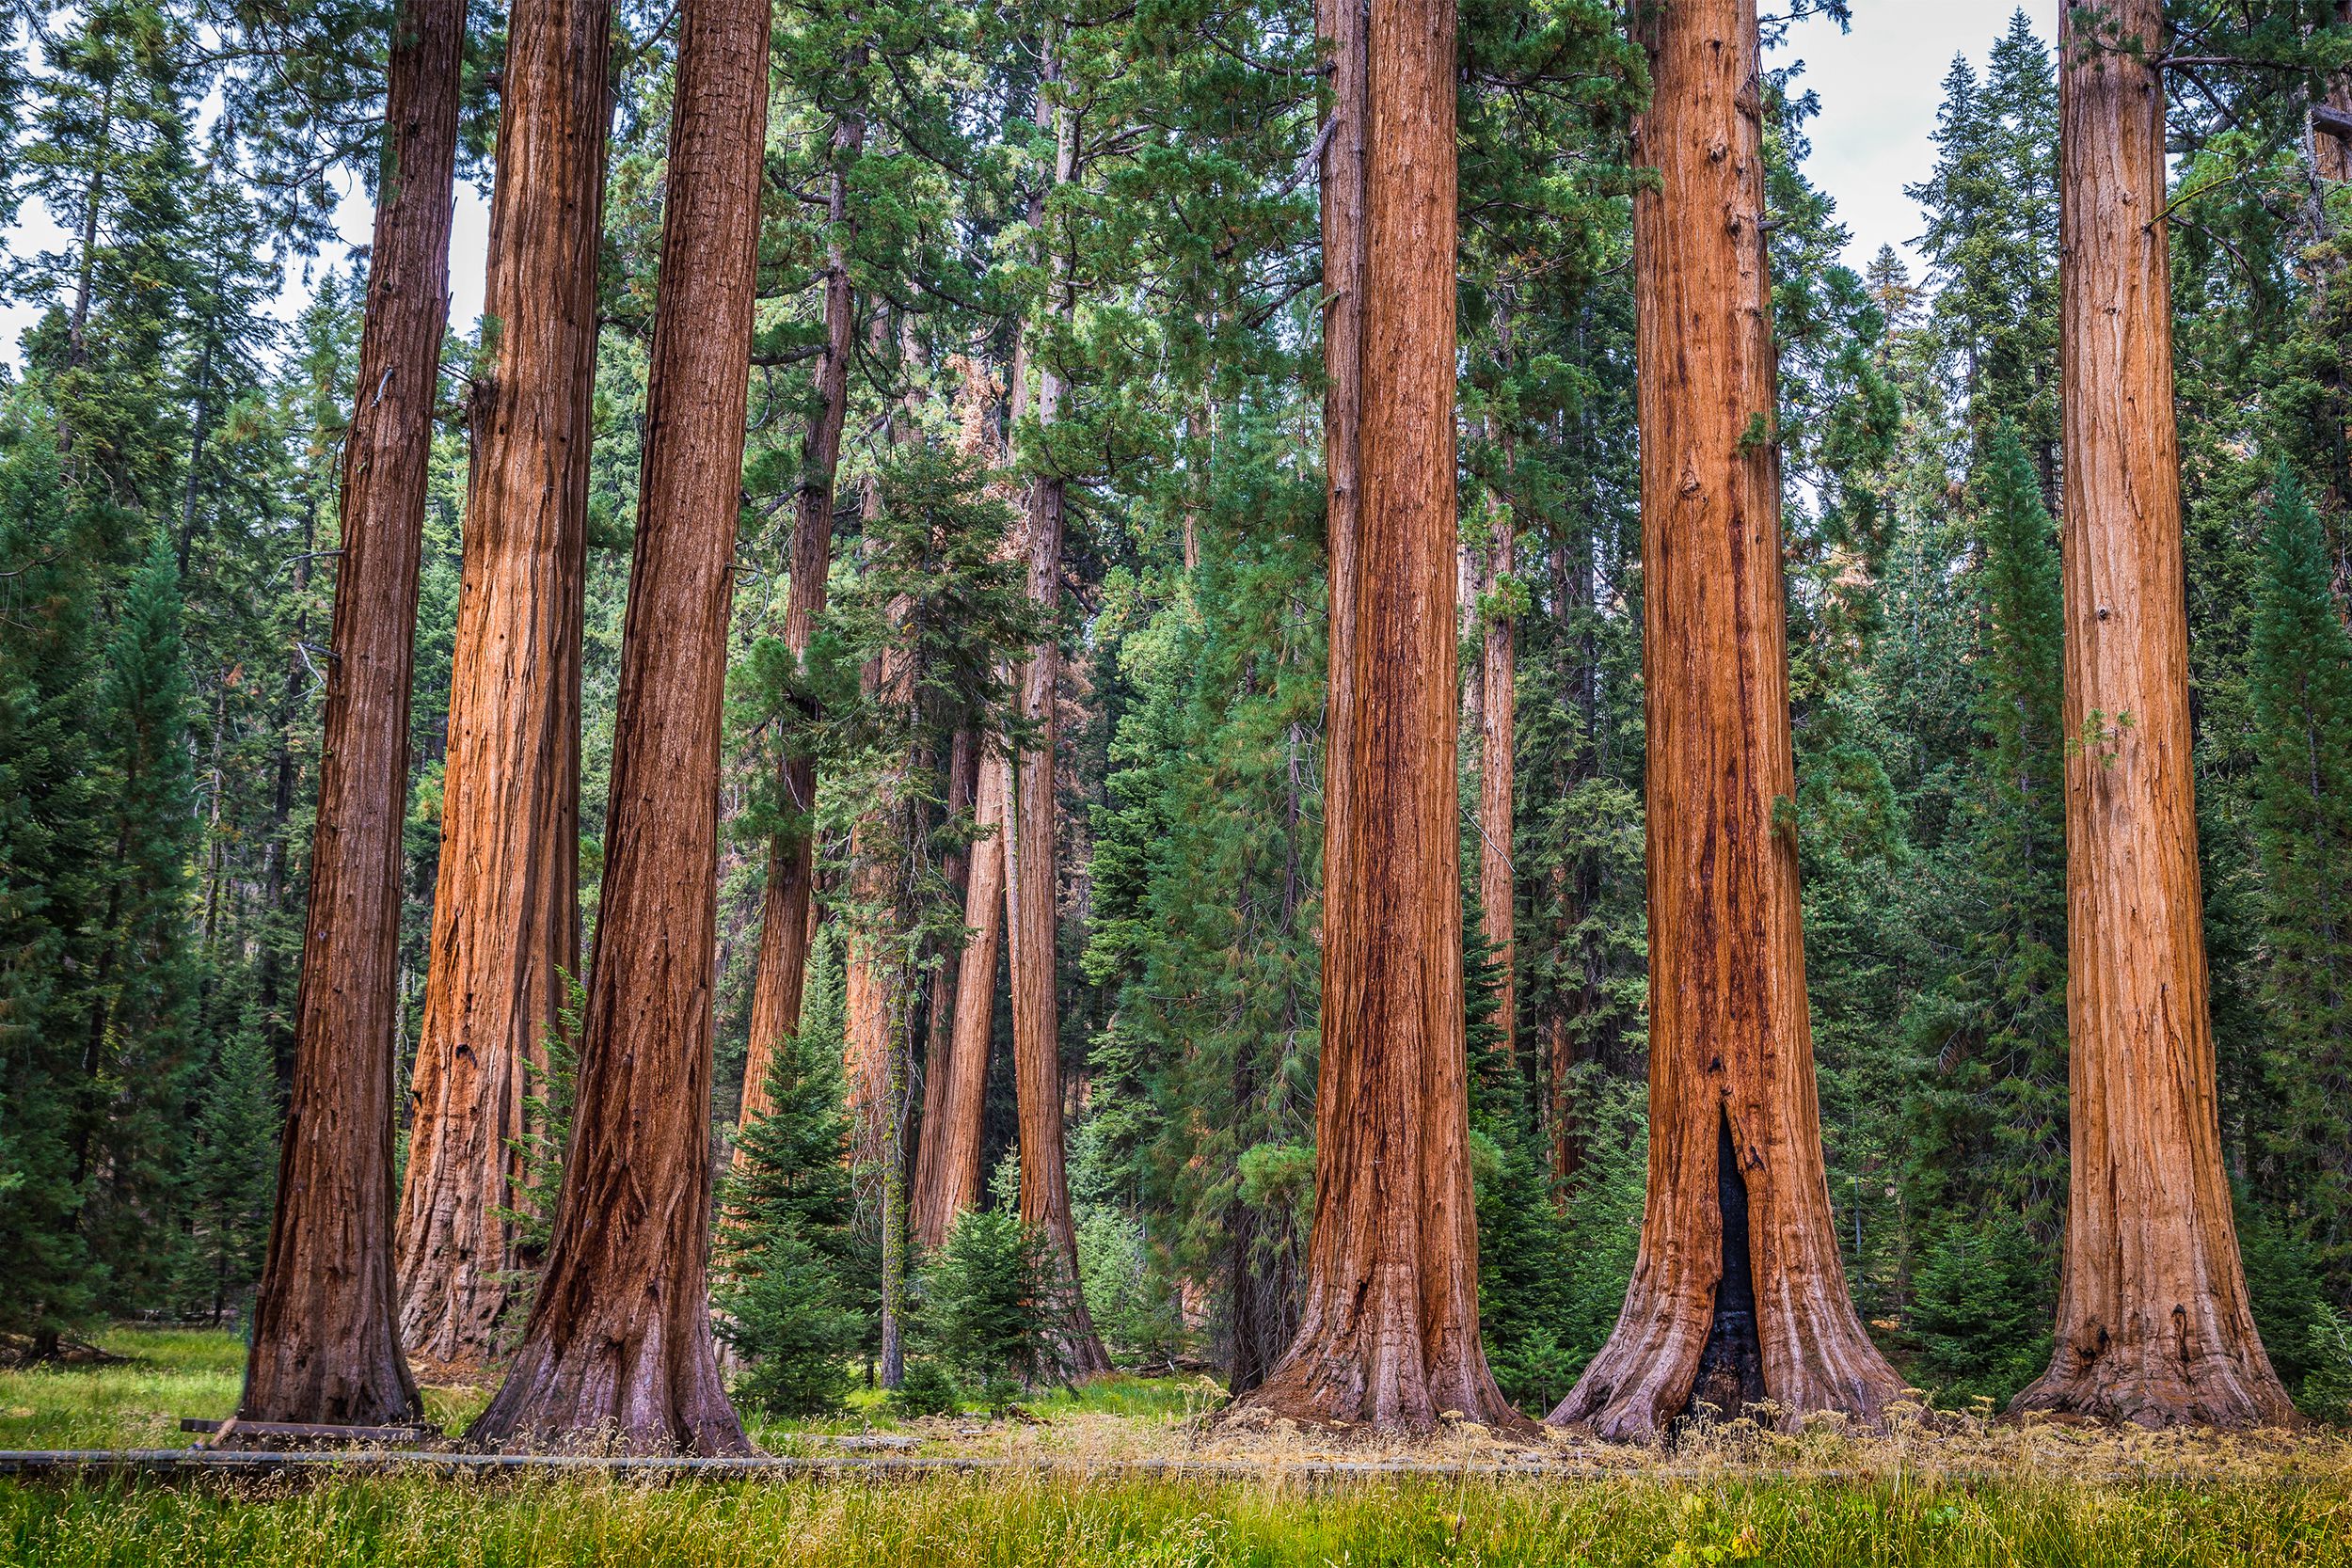 <p>Known for the towering redwood trees found within its boundaries, <a href="https://www.nps.gov/seki/index.htm">Sequoia National Park</a> is one of the oldest national parks in the United States. Created in 1890, the park spans more than 400,000 acres and includes the Crystal Cave, where there are underground streams and striking rock formations.</p>